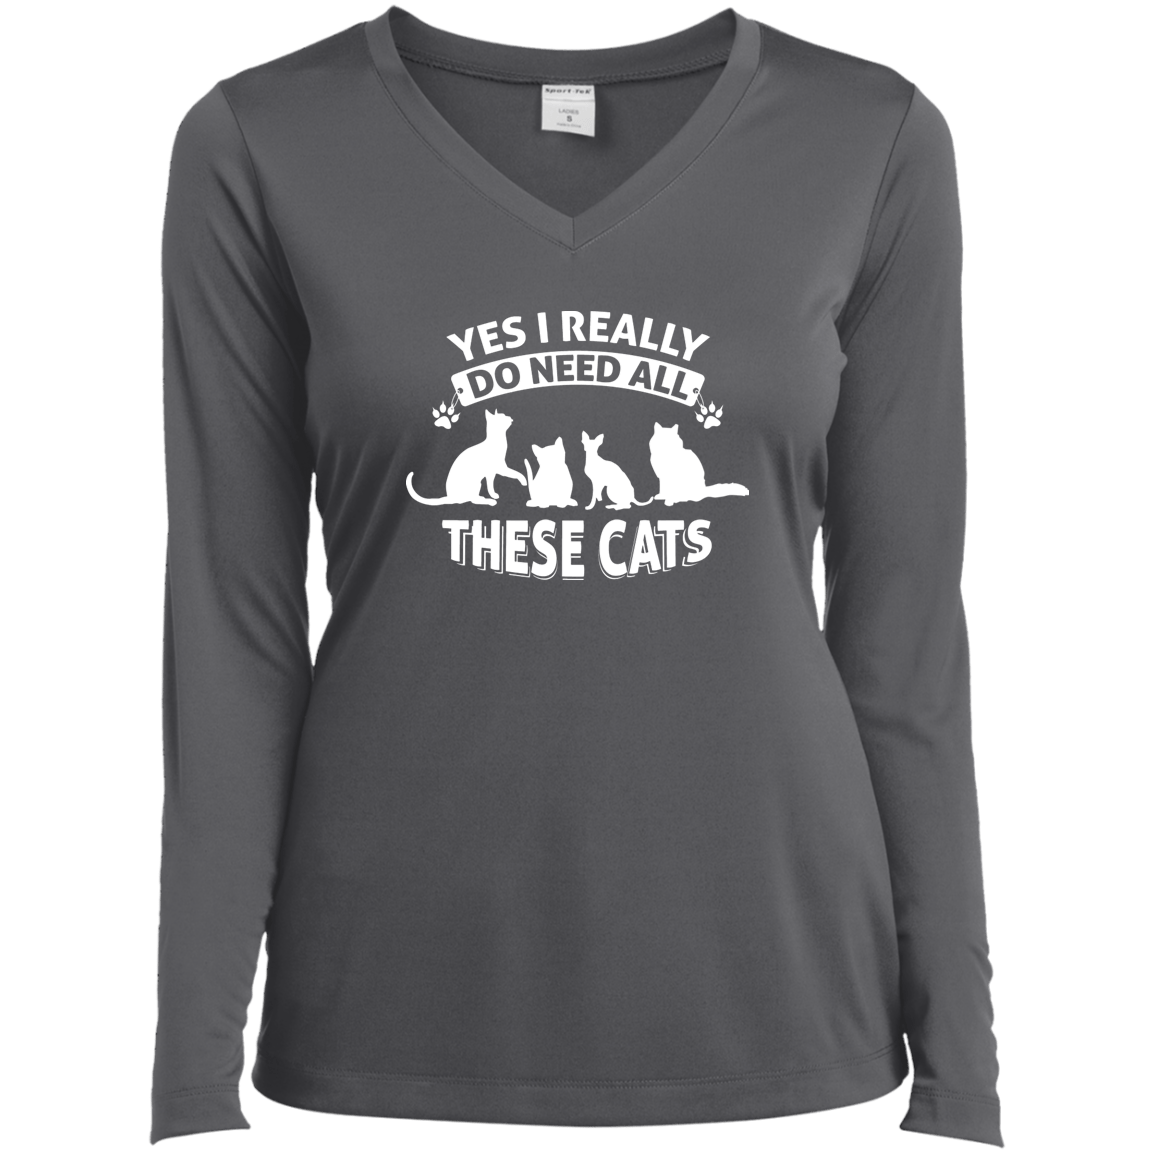 Yes I Need All These Cats - Long Sleeve Ladies V Neck.